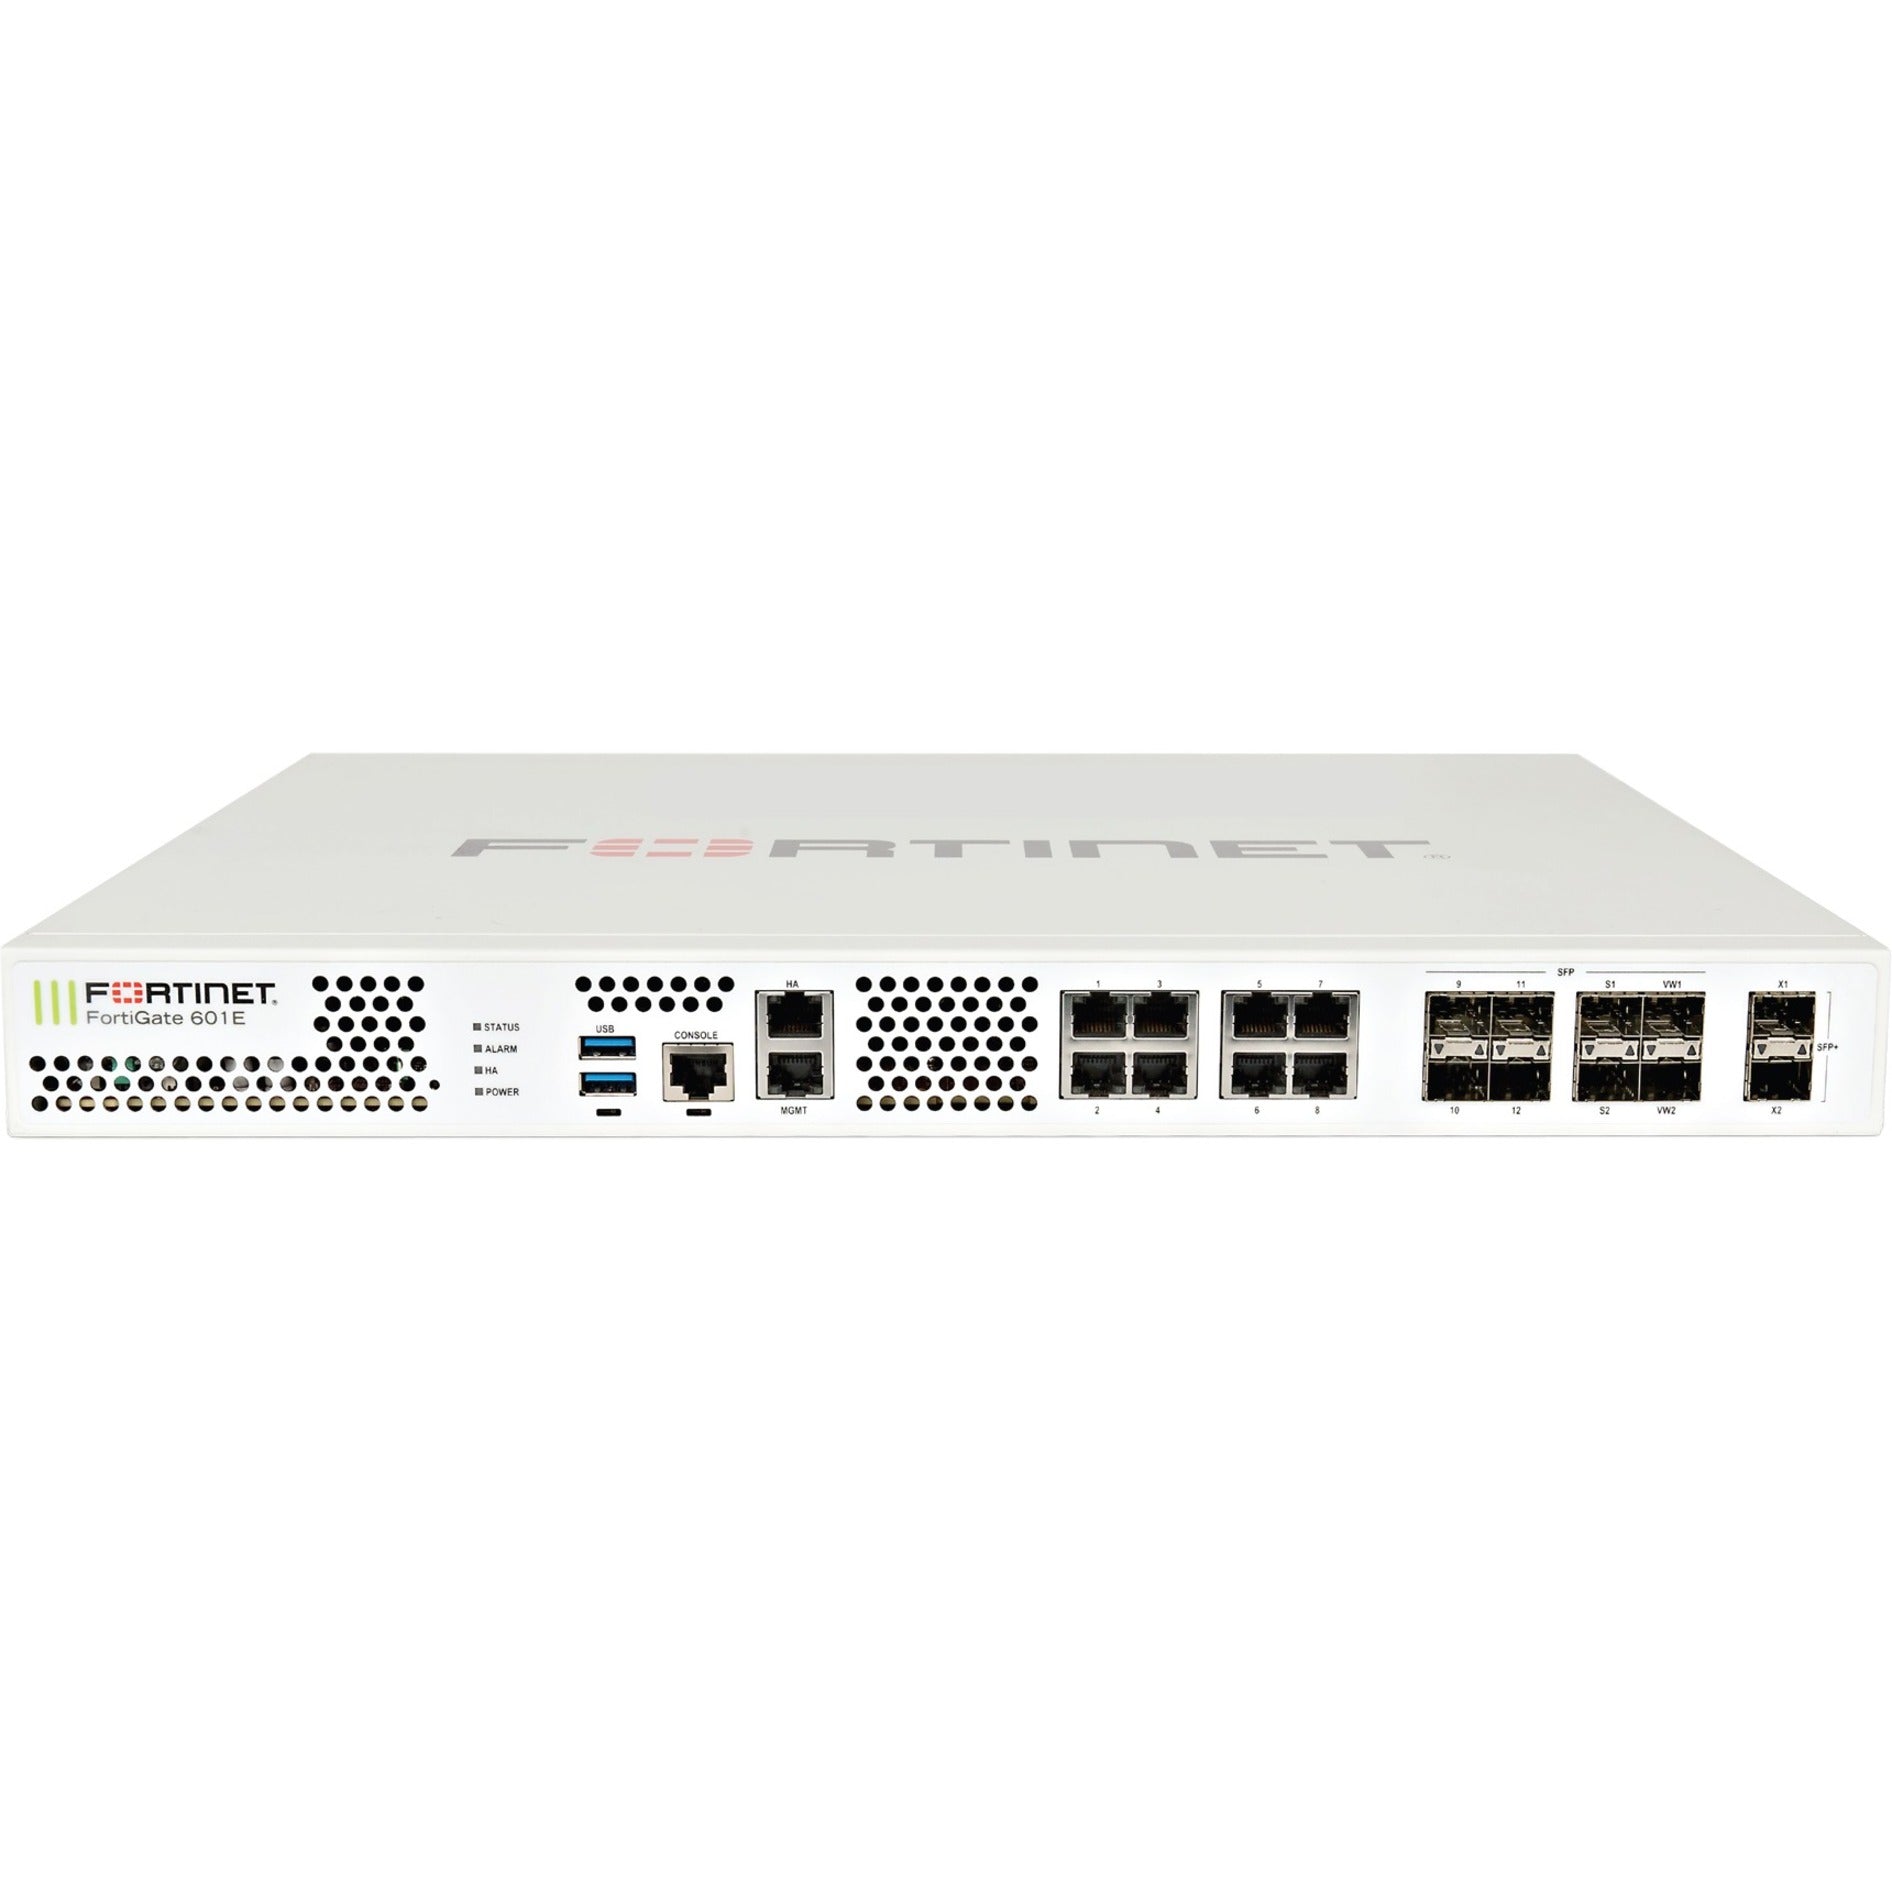 Fortinet FG-601E FortiGate 601E Network Security/Firewall Appliance, Threat Protection, Malware Protection, Web Protection